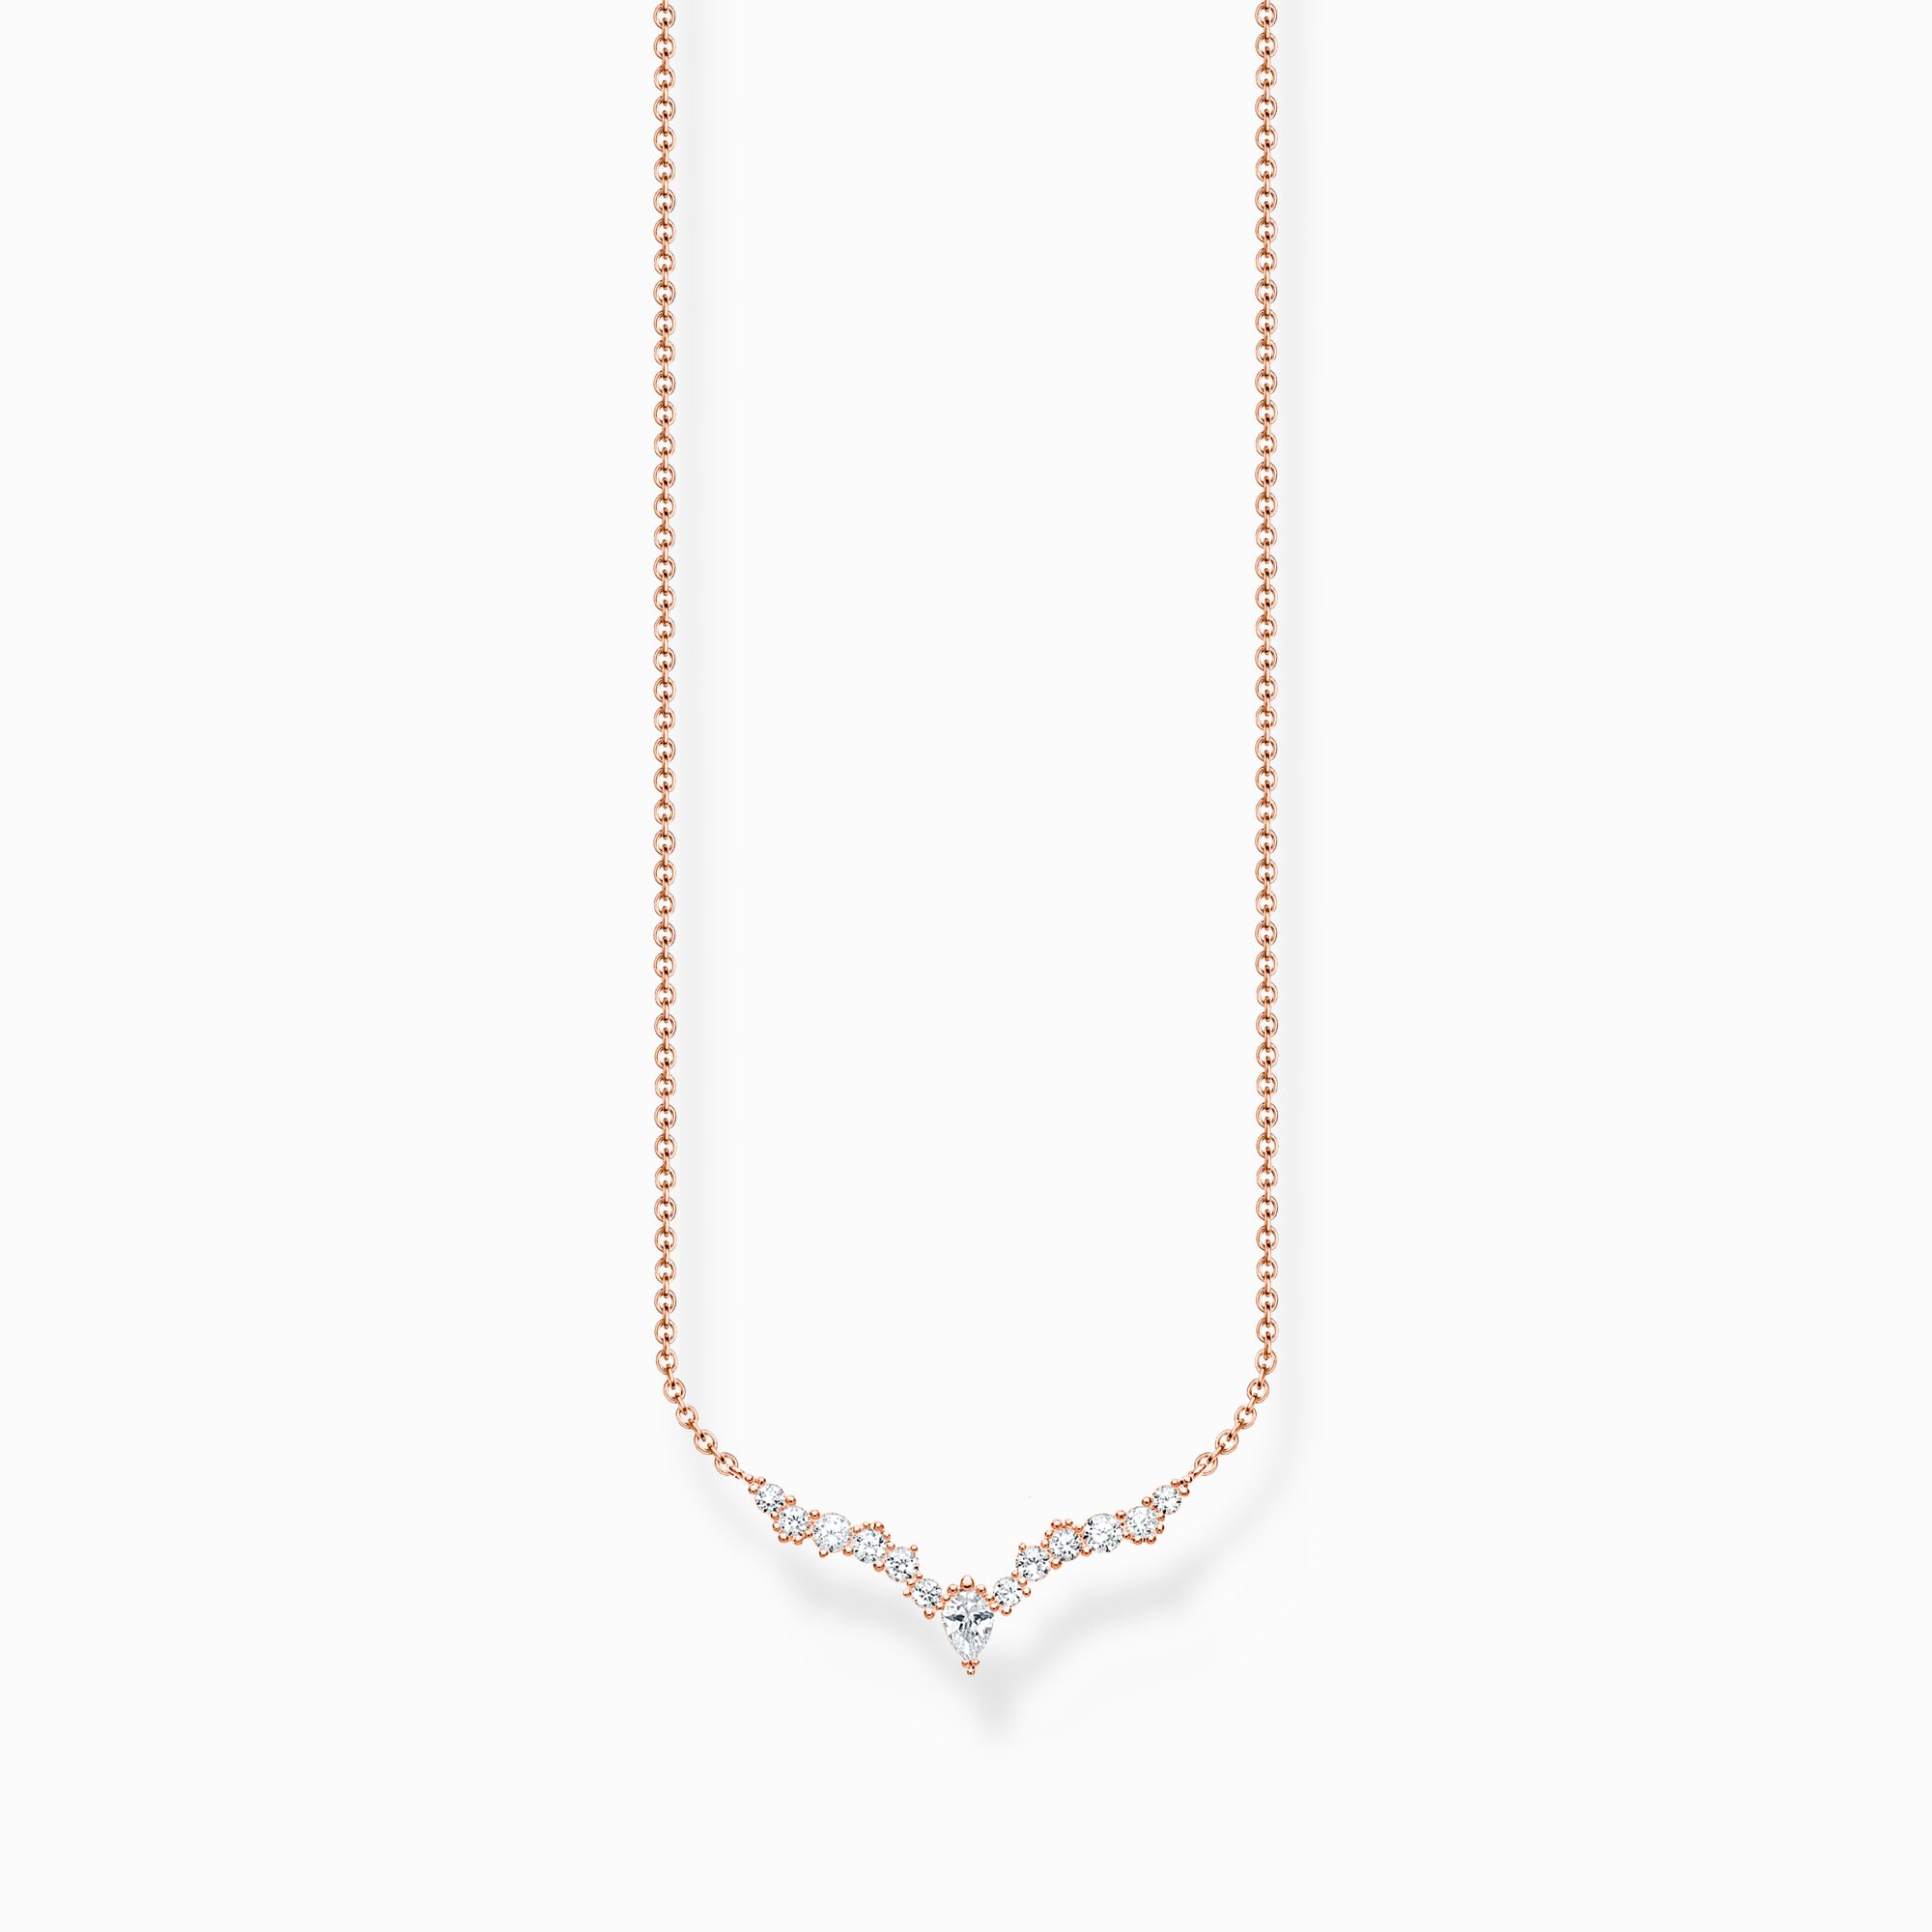 Necklace ice crystals rose gold from the Charming Collection collection in the THOMAS SABO online store